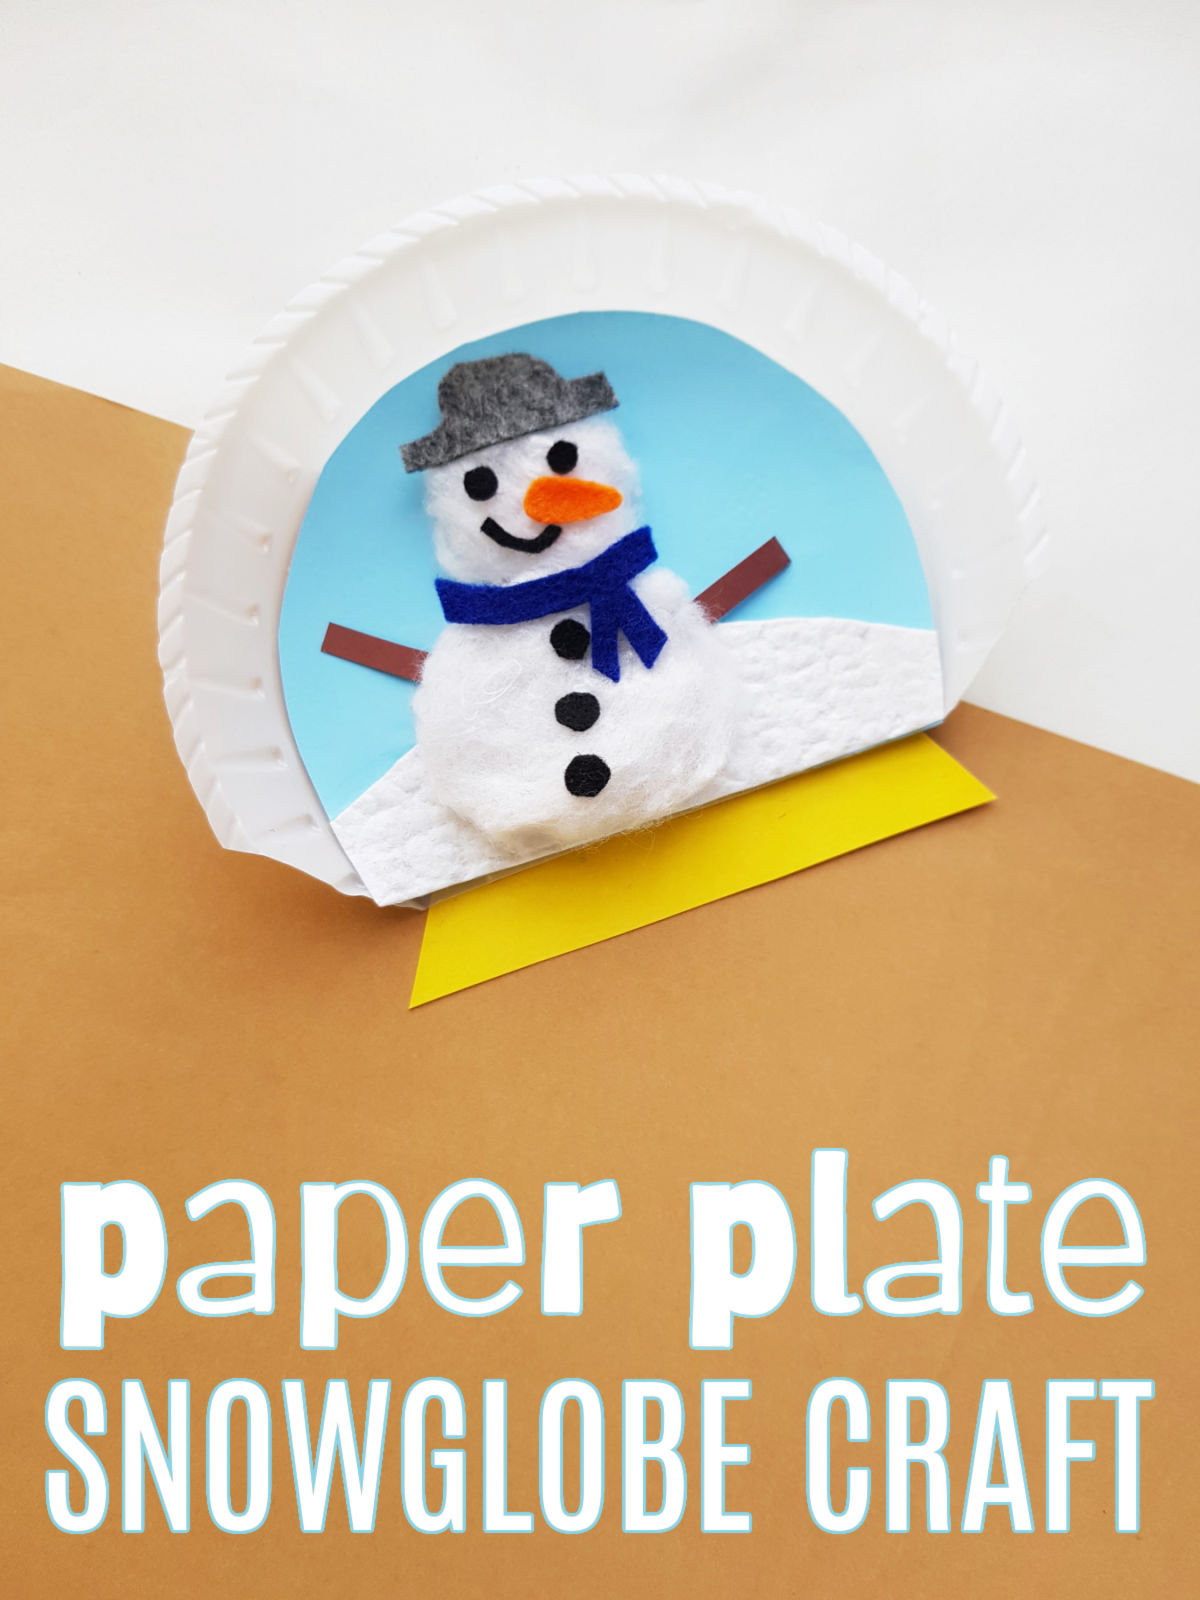 Paper Plate Snow Globe Craft on a white and brown background.